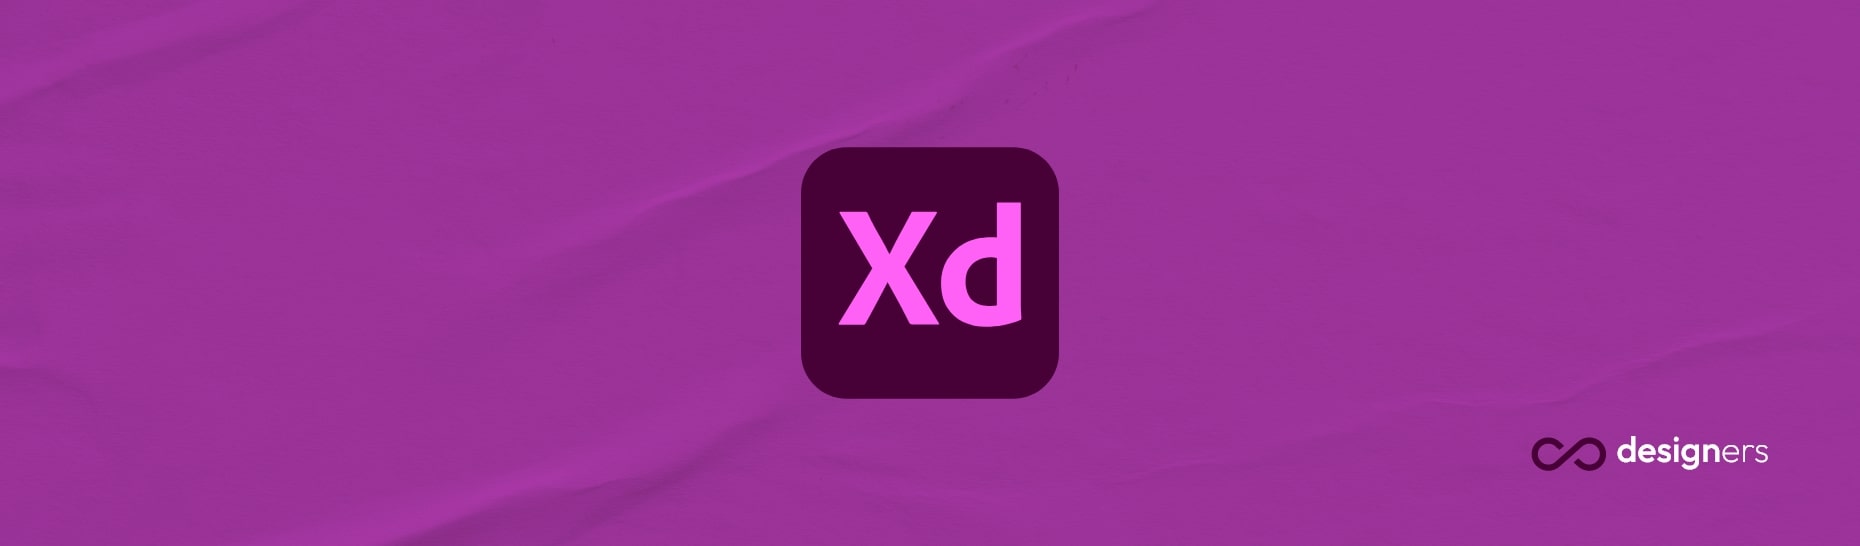 Why Adobe XD is better than Photoshop?